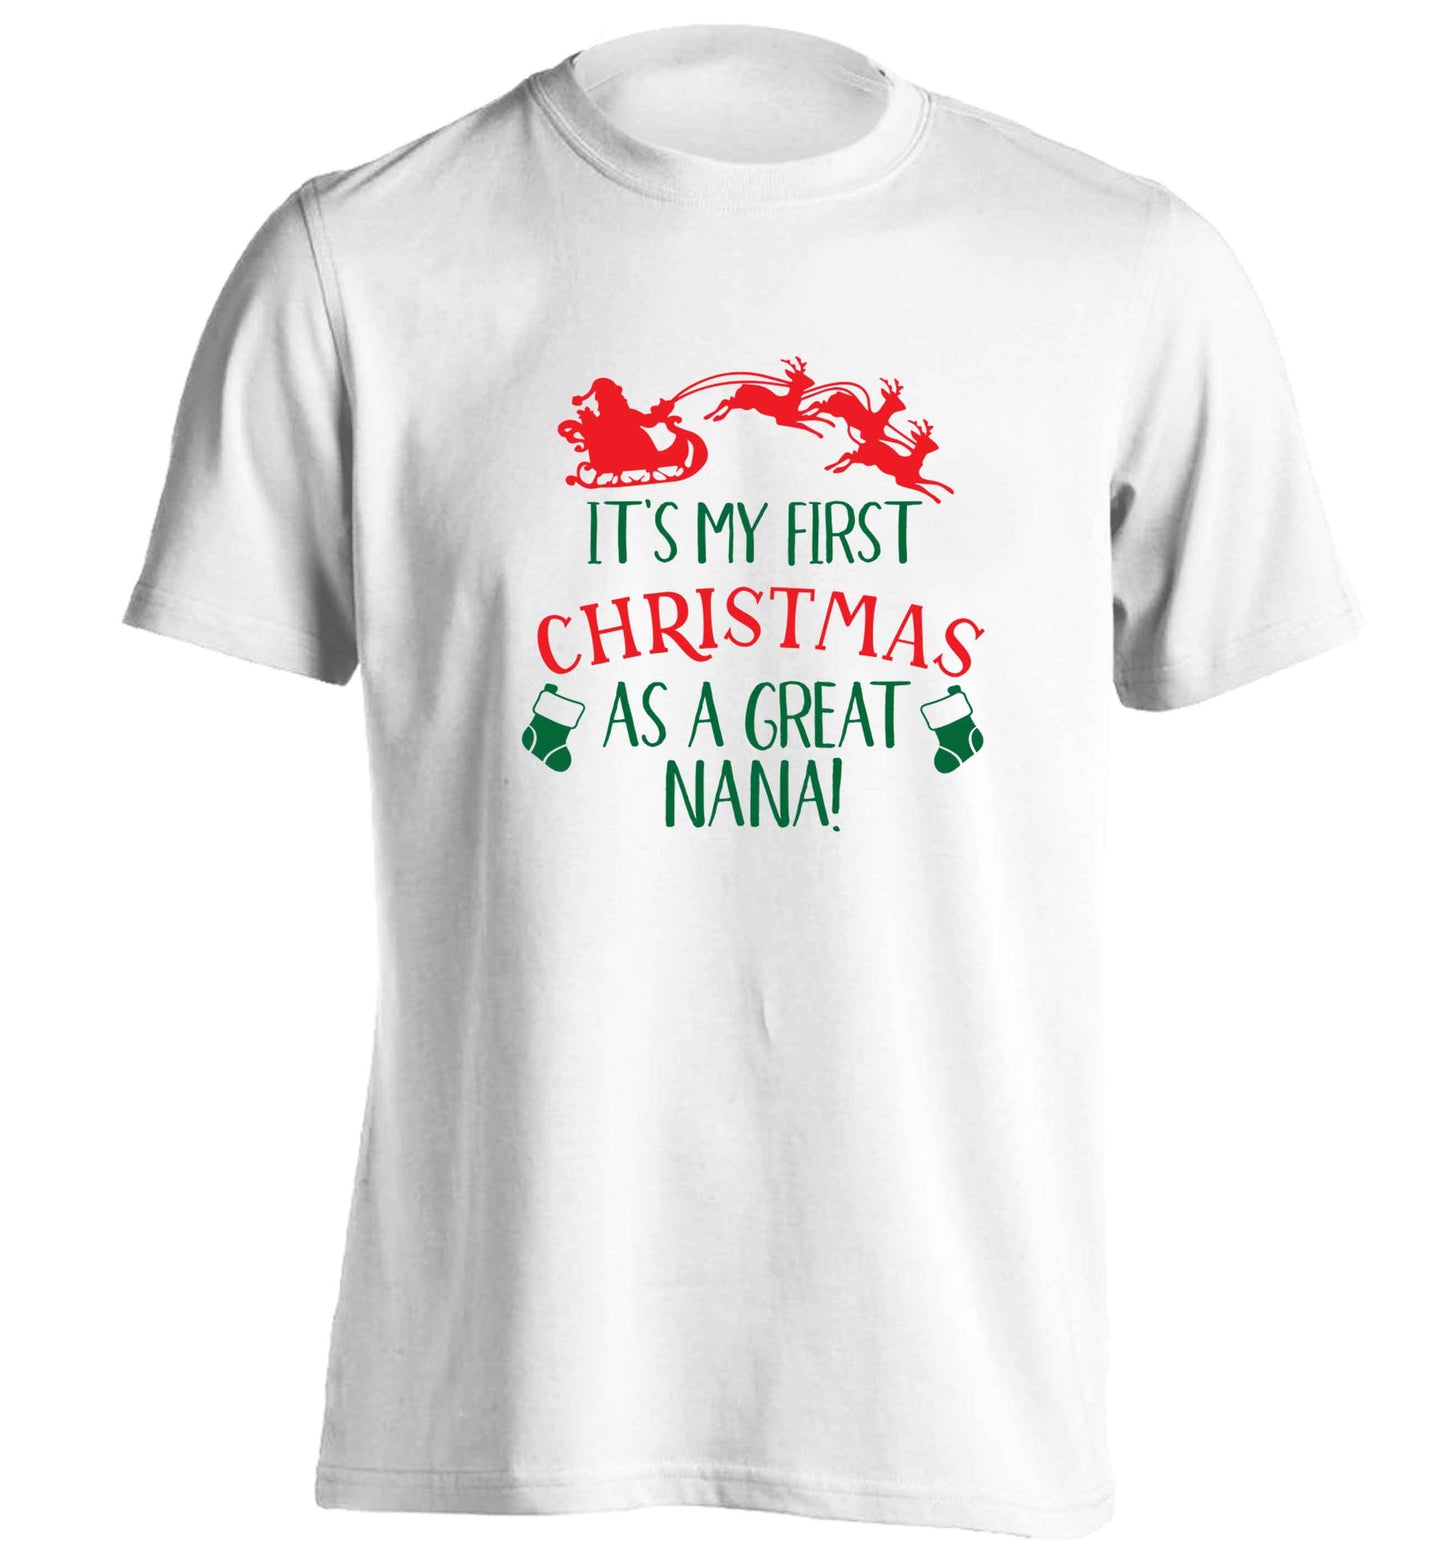 It's my first Christmas as a great nana! adults unisex white Tshirt 2XL